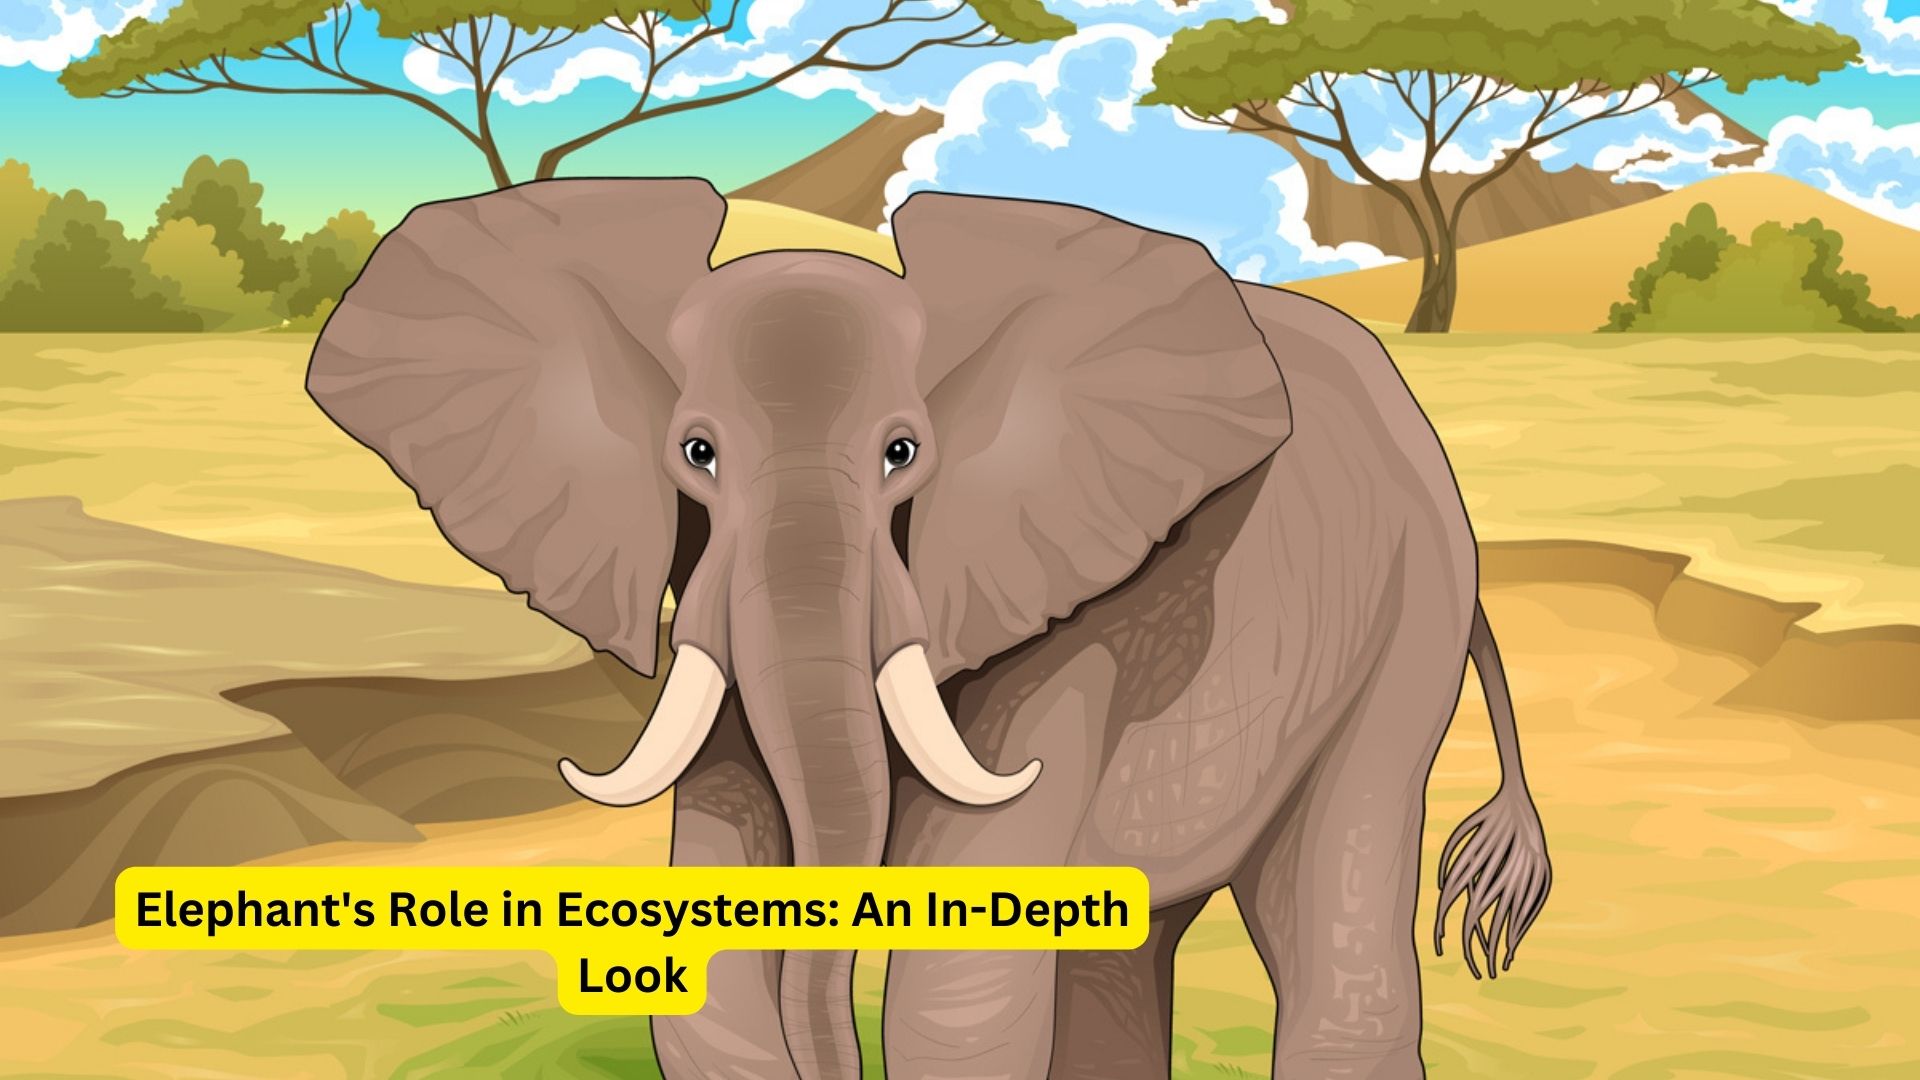 Elephant's Role in Ecosystems: An In-Depth Look